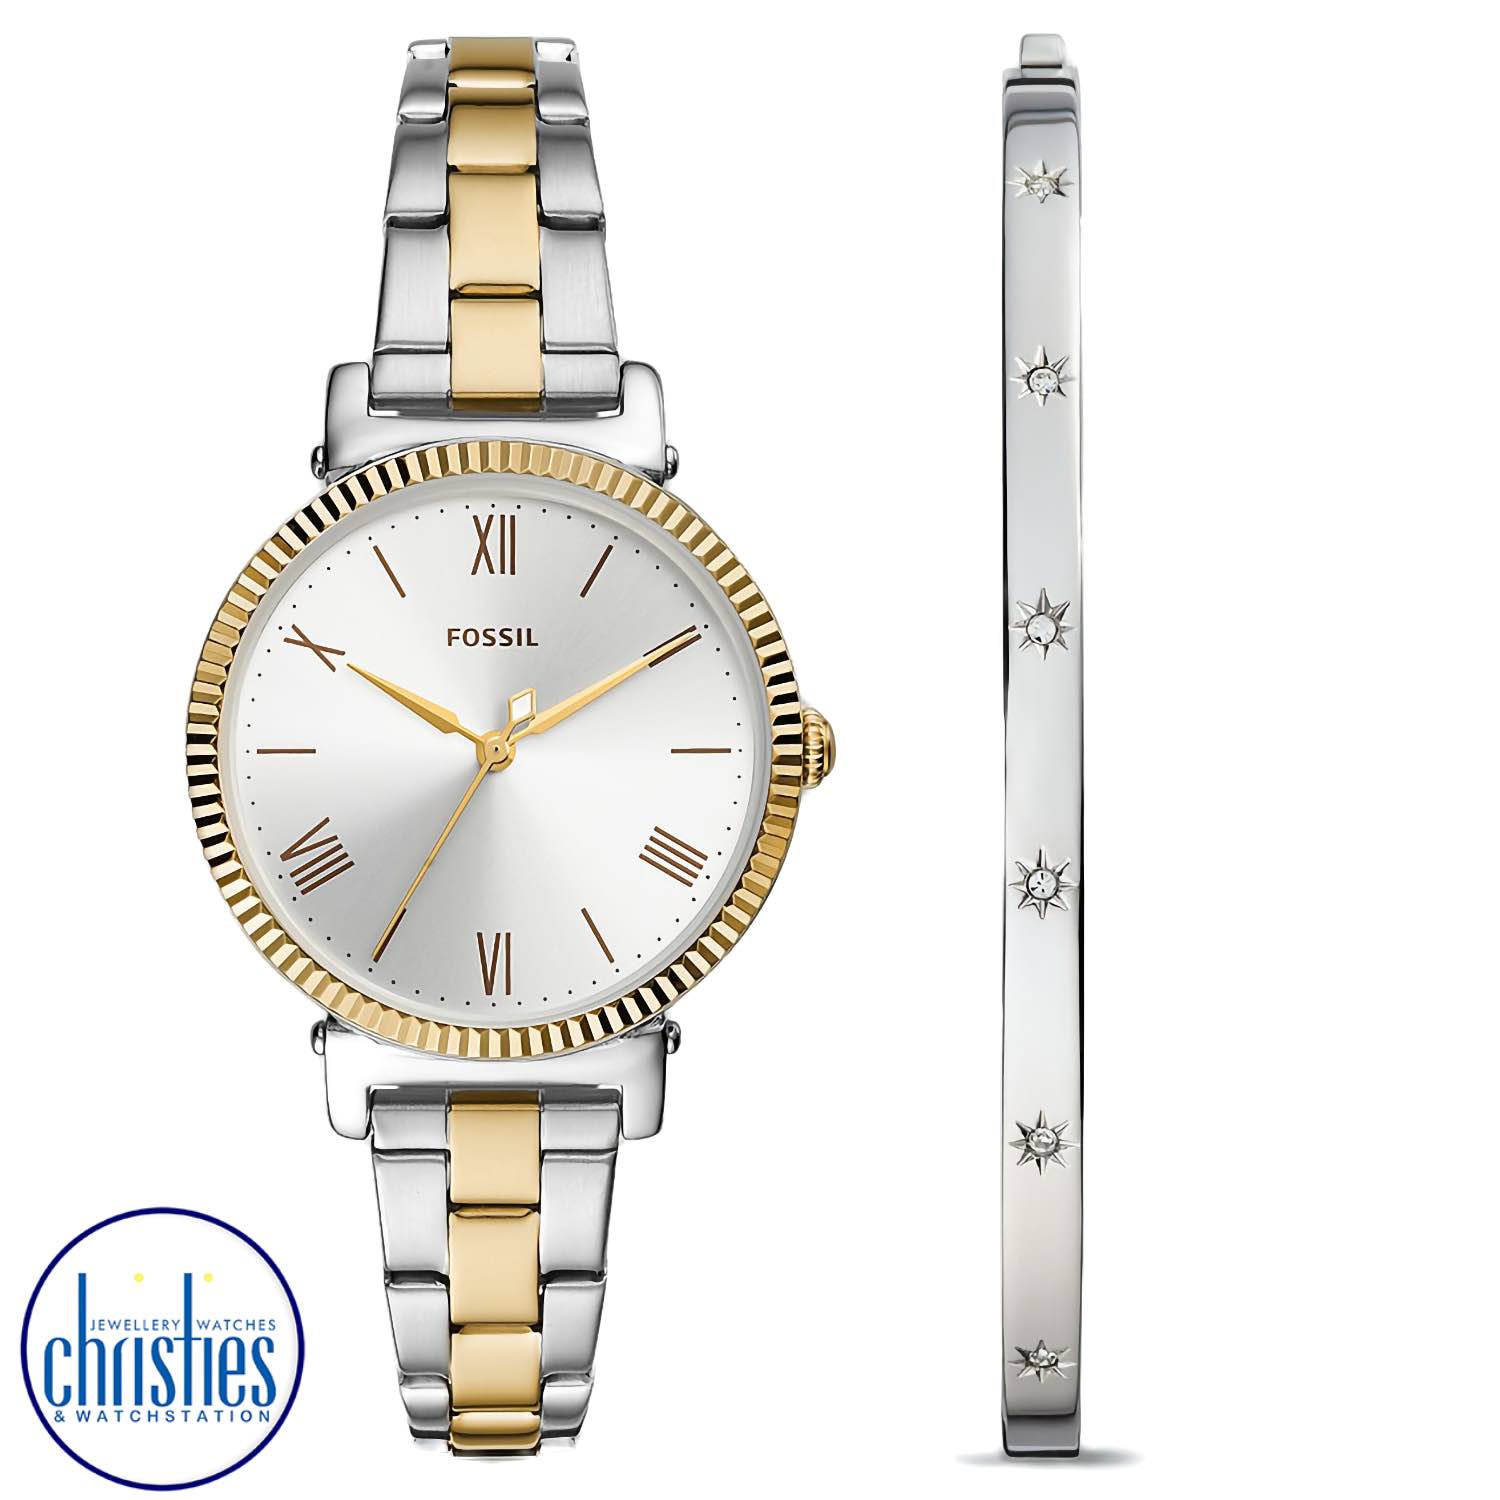 ES5249SET Fossil Daisy Three-Hand Two-Tone Stainless Steel Watch and Bracelet Set. ES5252SET Fossil Jaqueline Three-Hand Date Rose Gold-Tone Stainless Steel Watch and Jewellery SetAfterpay - Split your purchase into 4 instalments - Pay for your purchase o